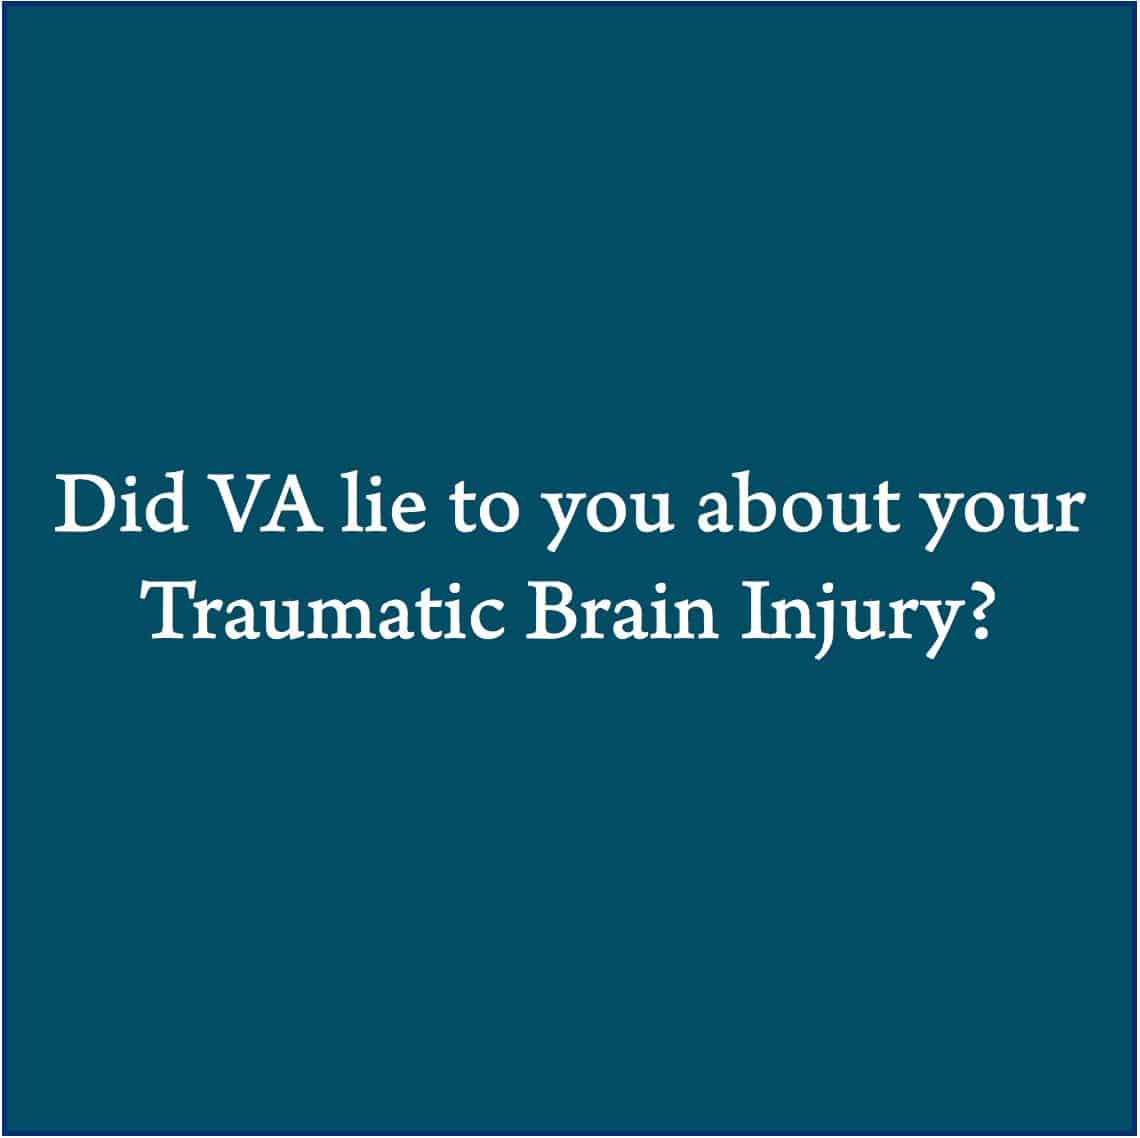 Is VA Lying about the Severity of your Traumatic Brain Injury